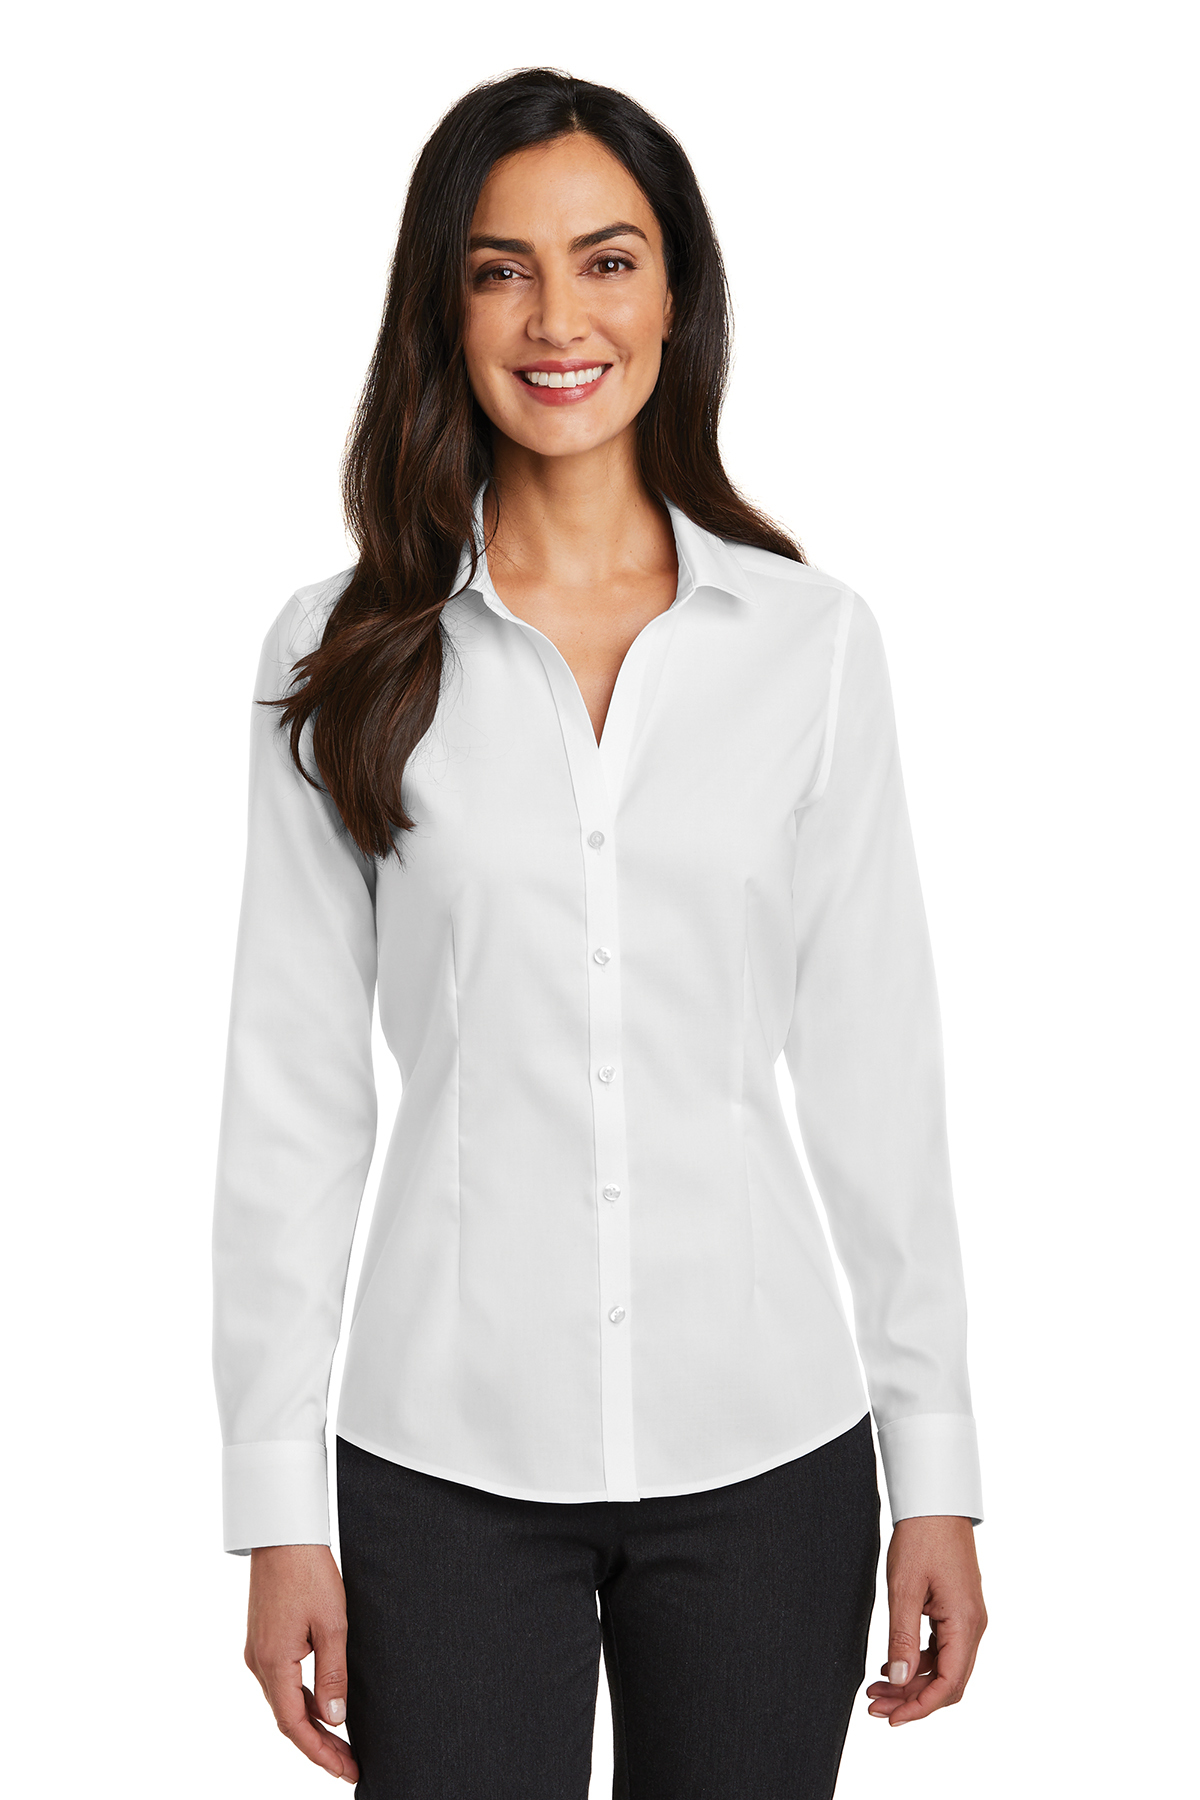 Red House RH250 - Ladiess Pinpoint Oxford Non-Iron Shirt